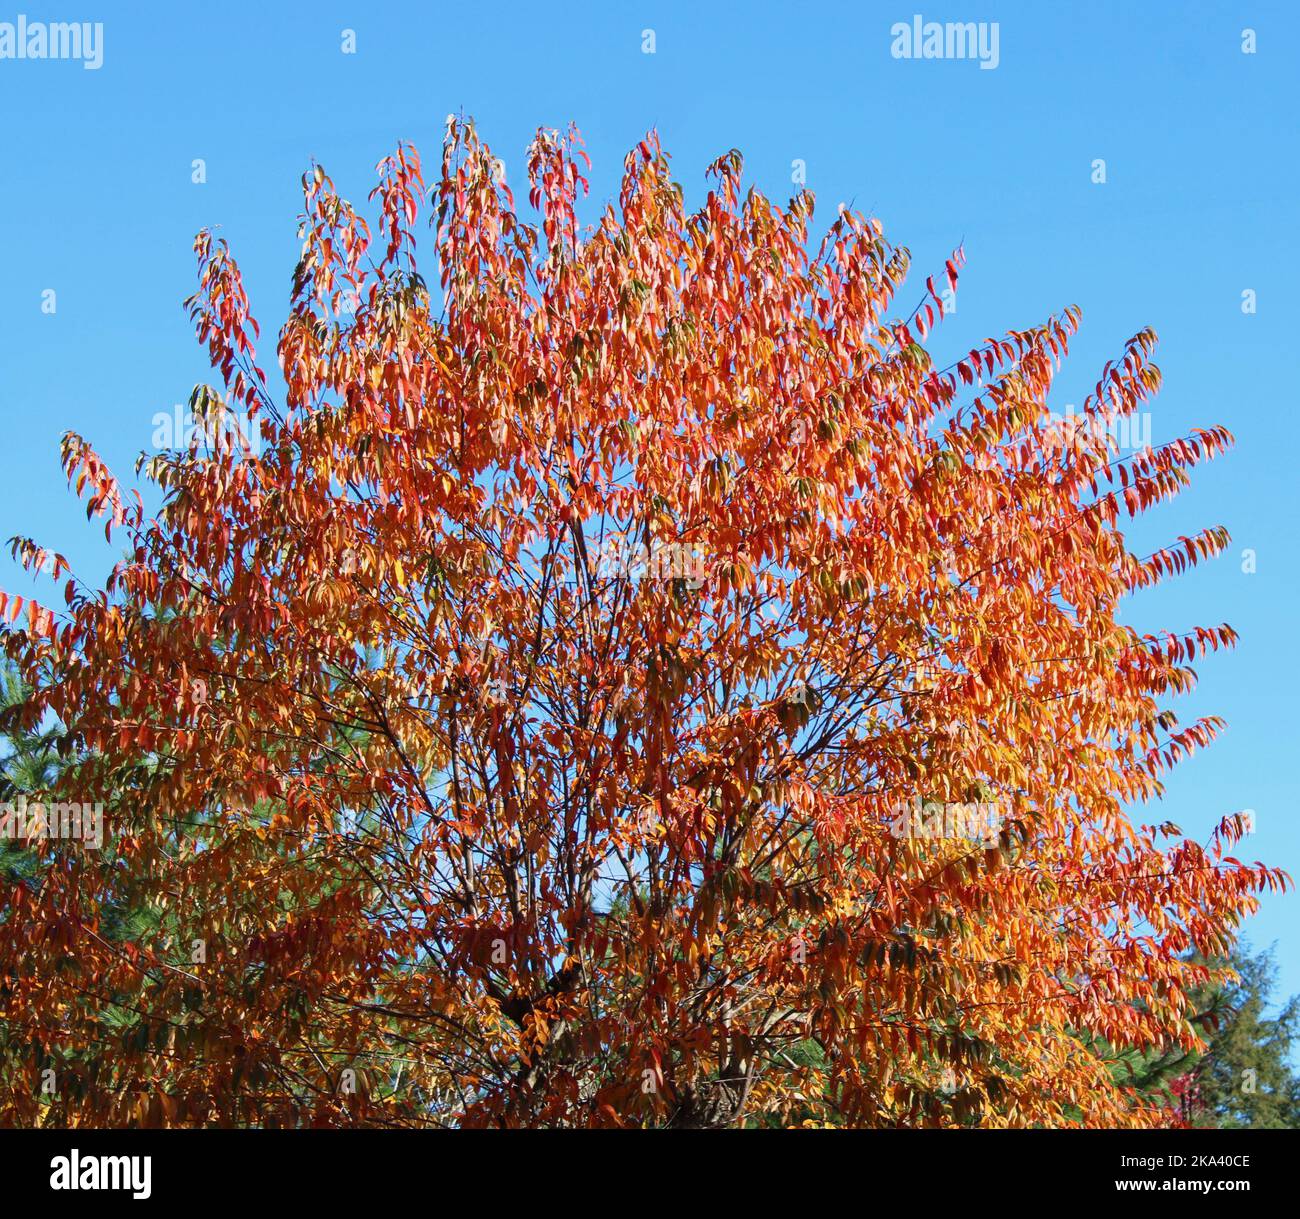 Brightly Colored Foliage on a Wild Black Cherry Tree in Autumn Stock Photo